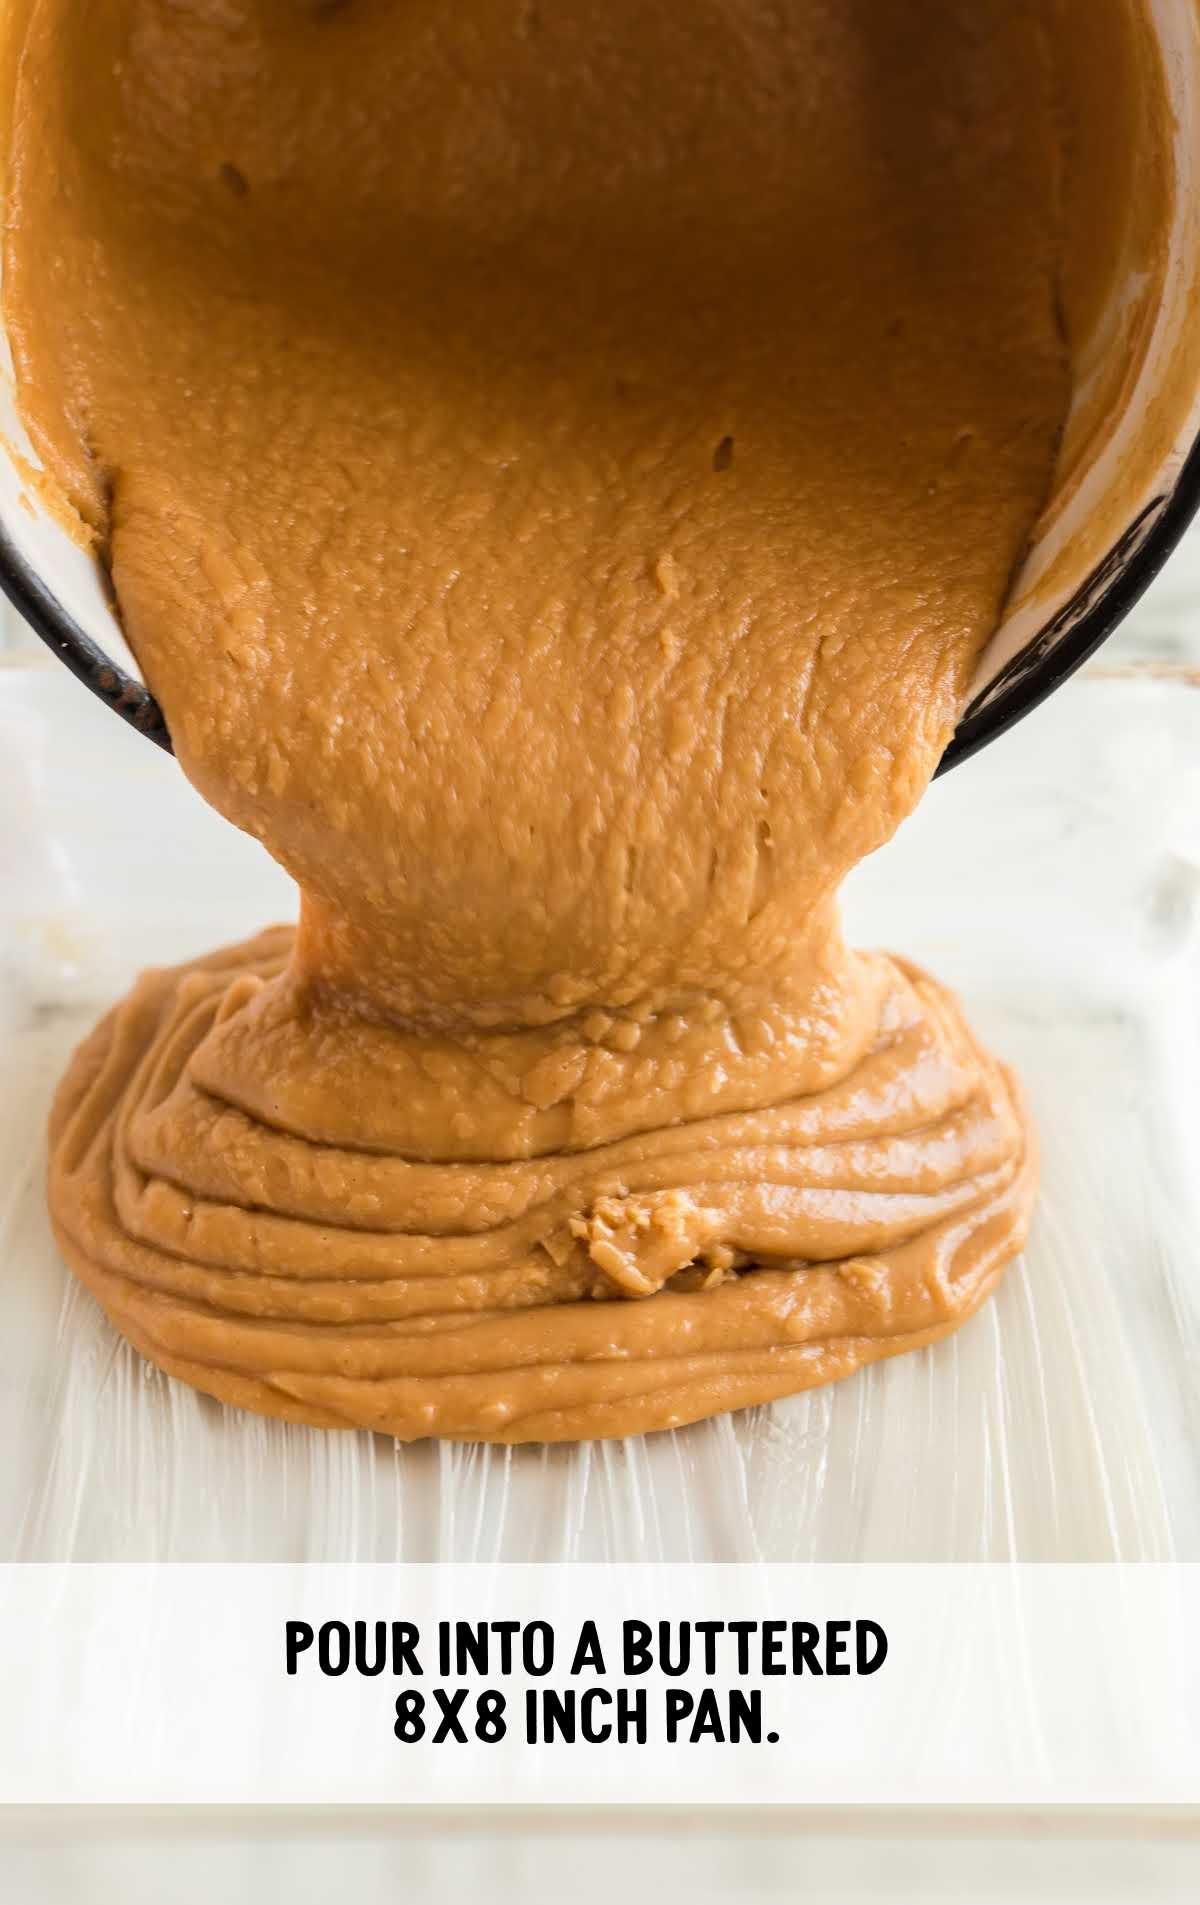 peanut butter mixture poured into a pan